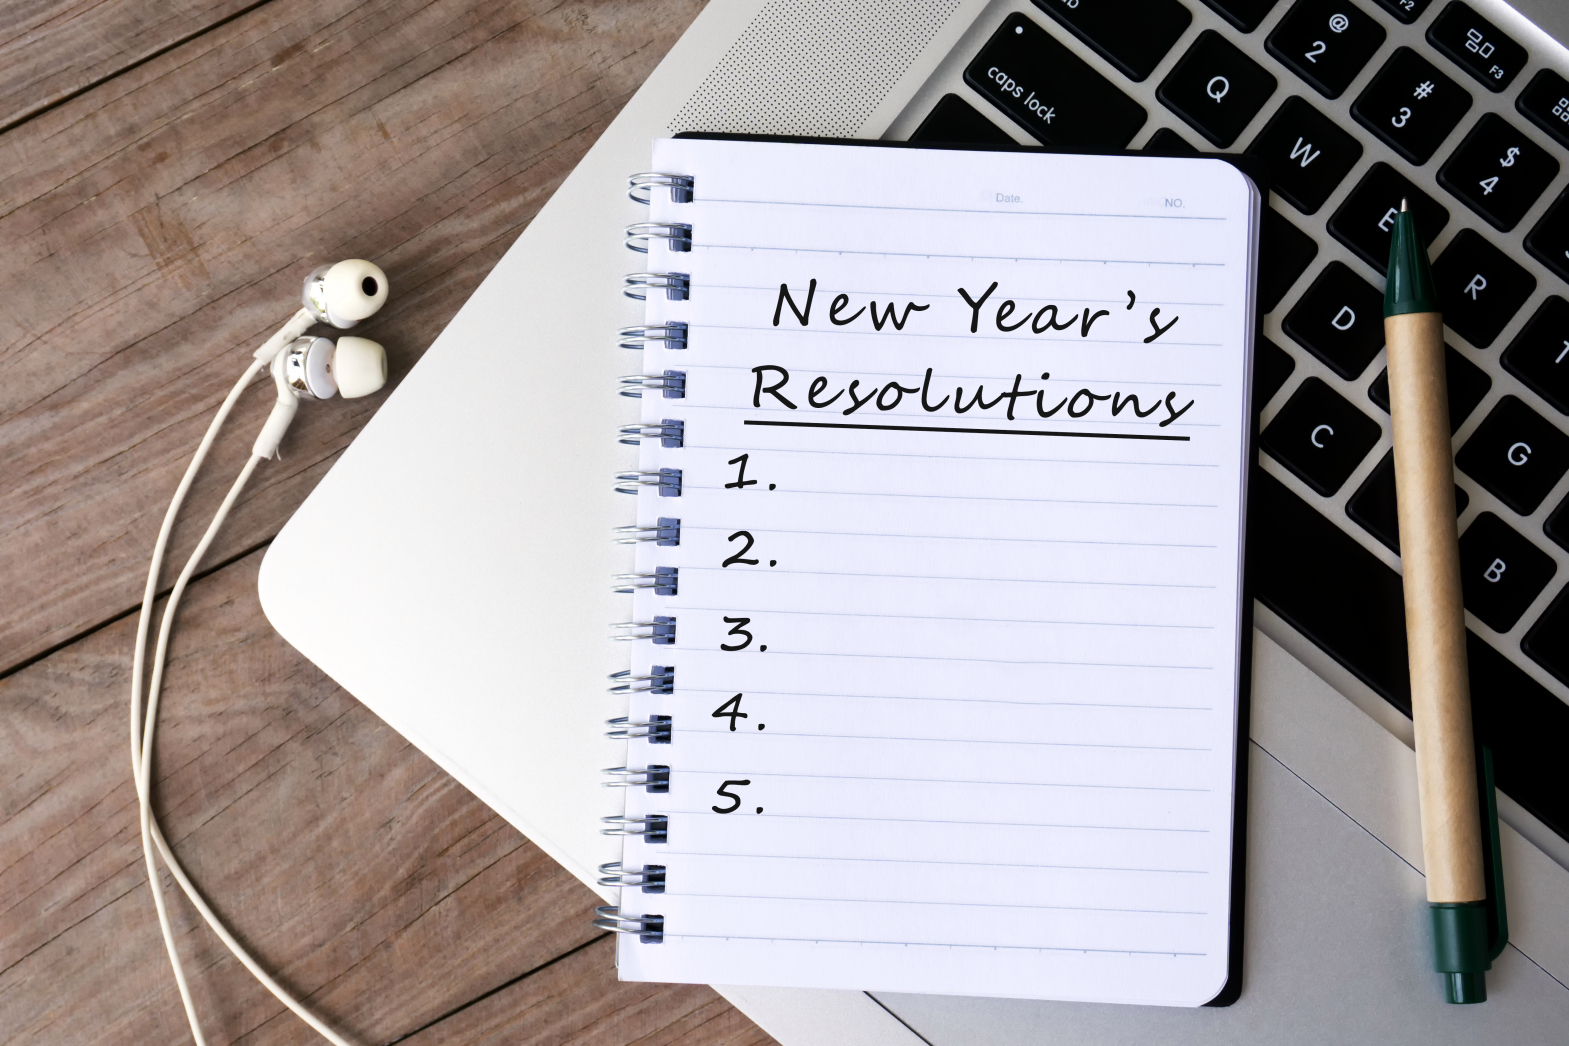 New Year's resolution numbered list